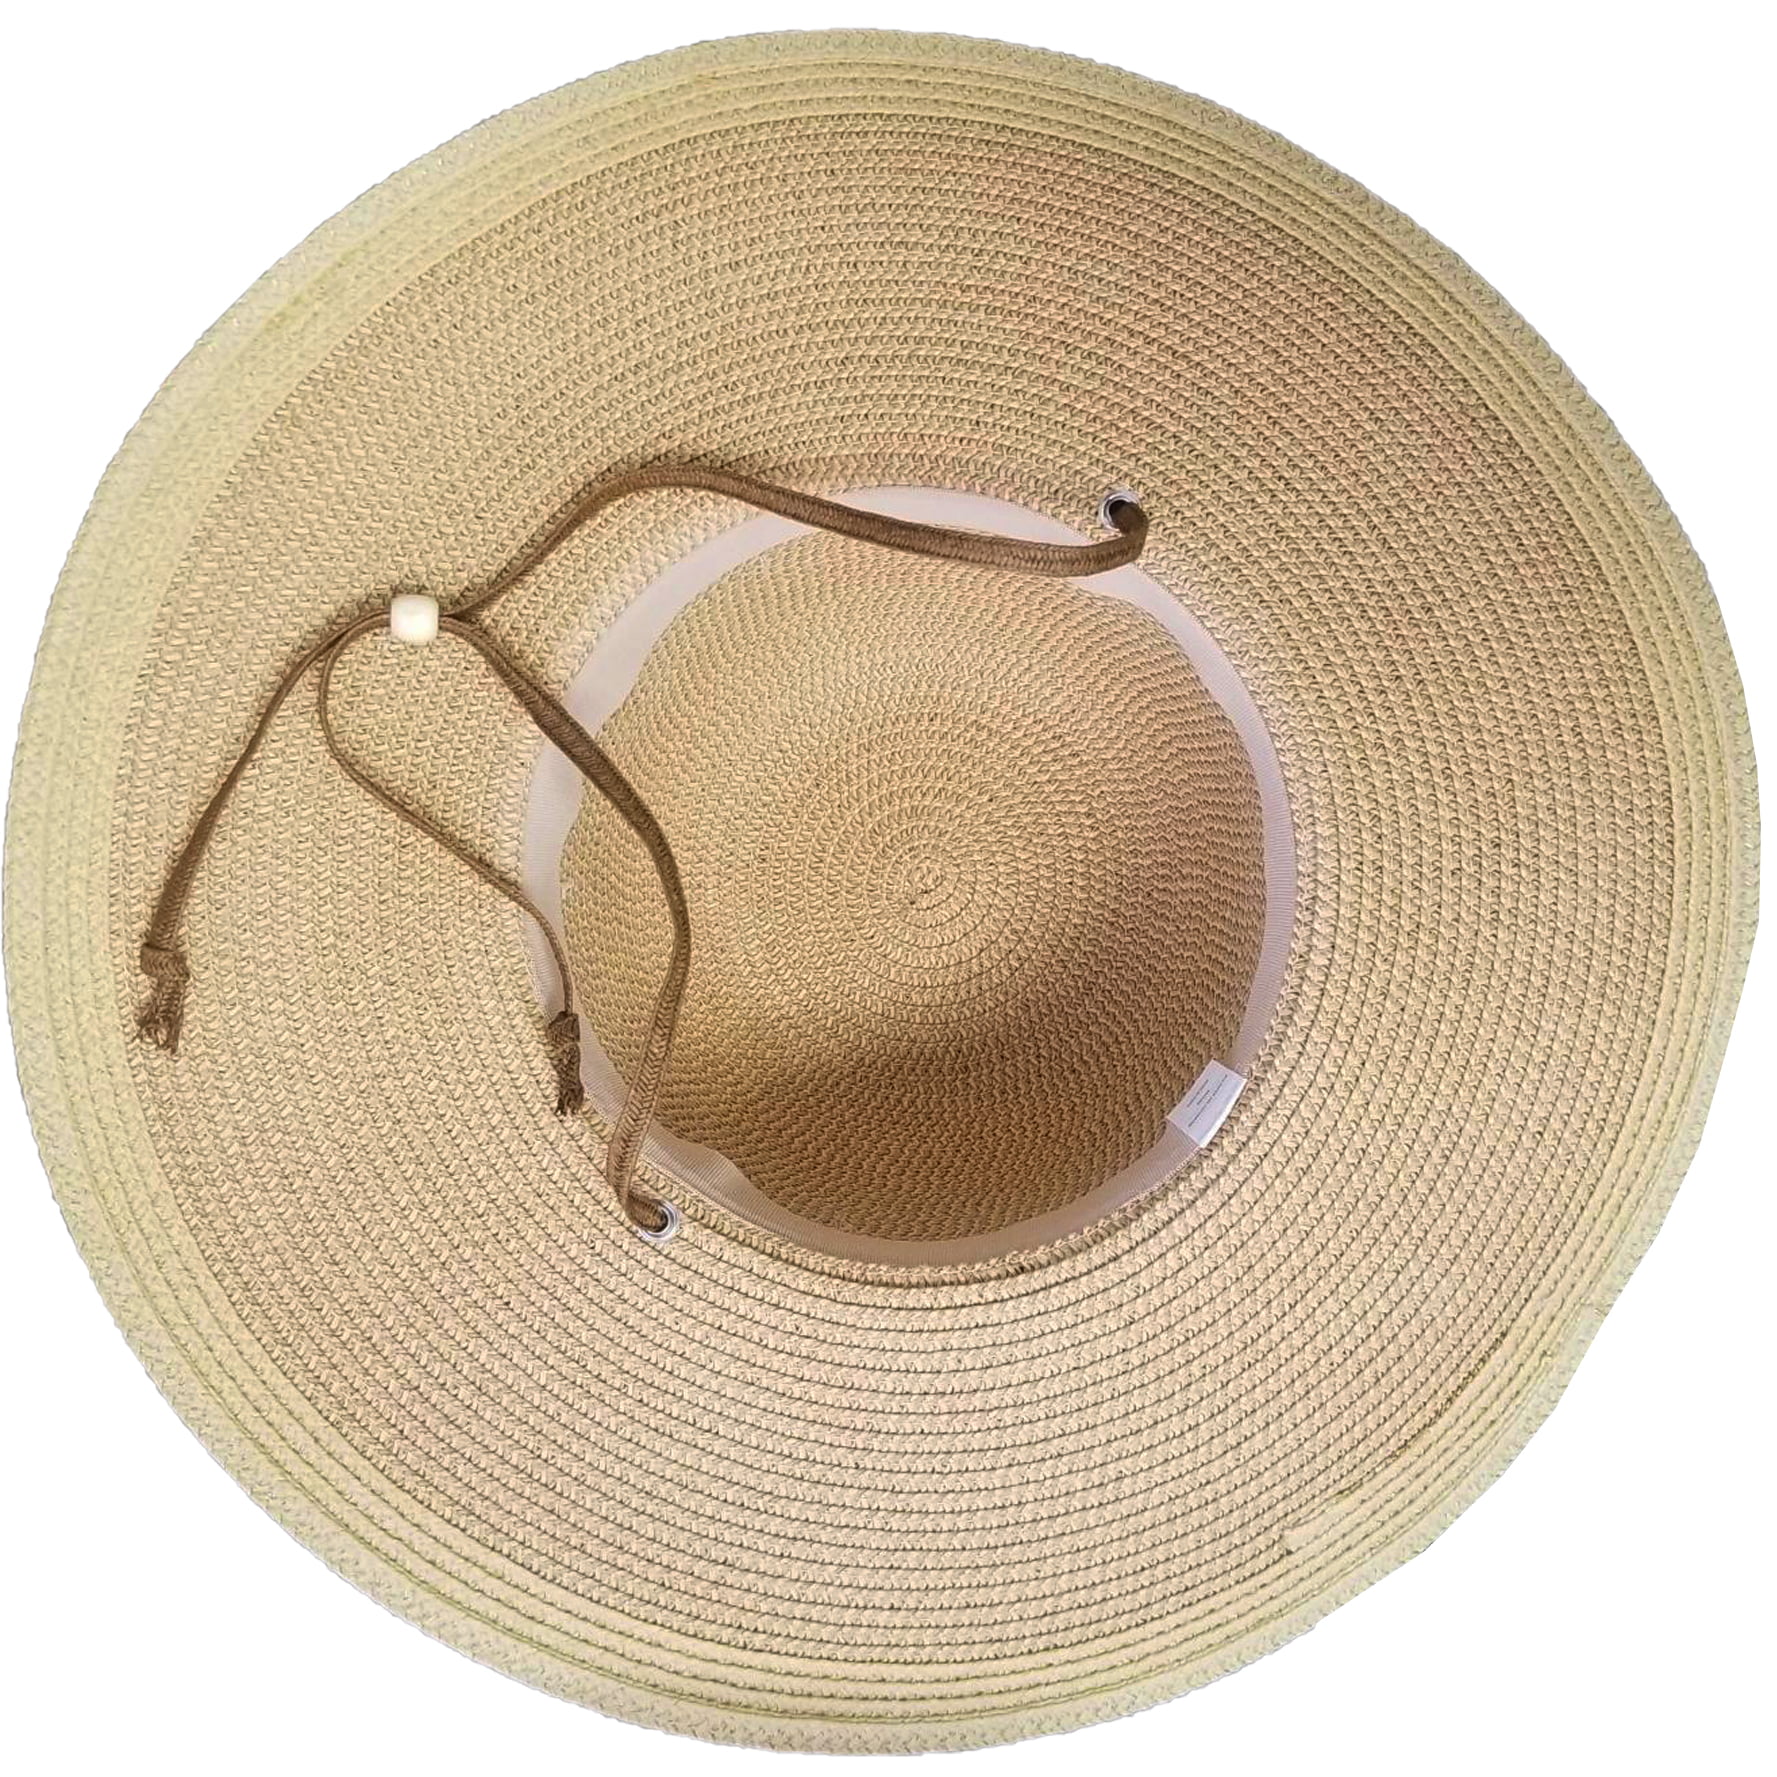 The Pioneer Woman Ladies Fits Most Garden Shade Hat - One Size Each